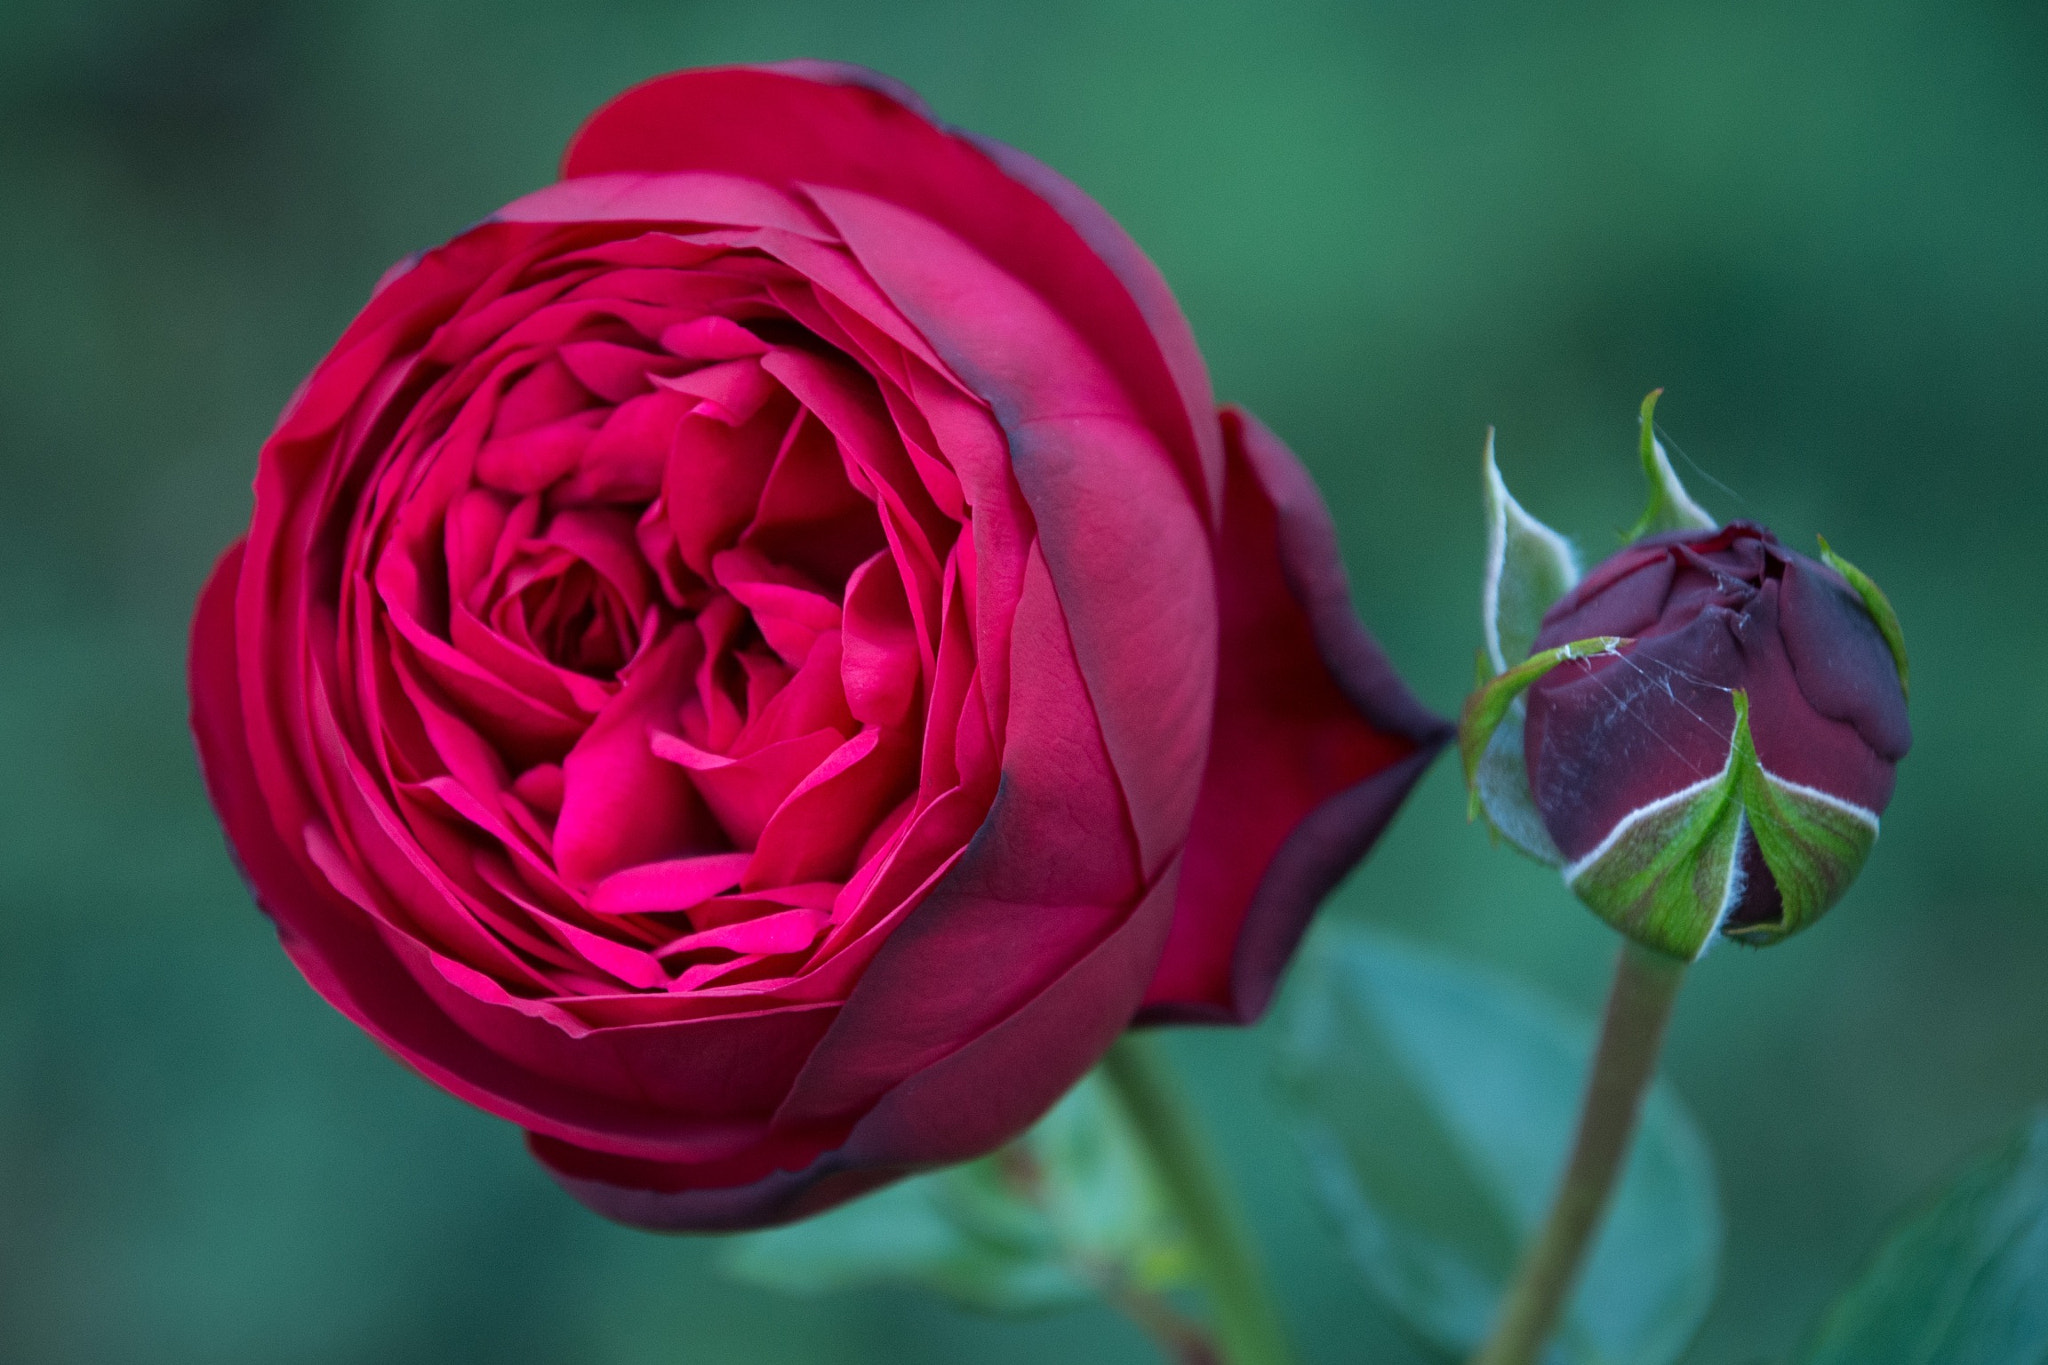 Nikon D7100 sample photo. I never promised you a rose garden... intro photography